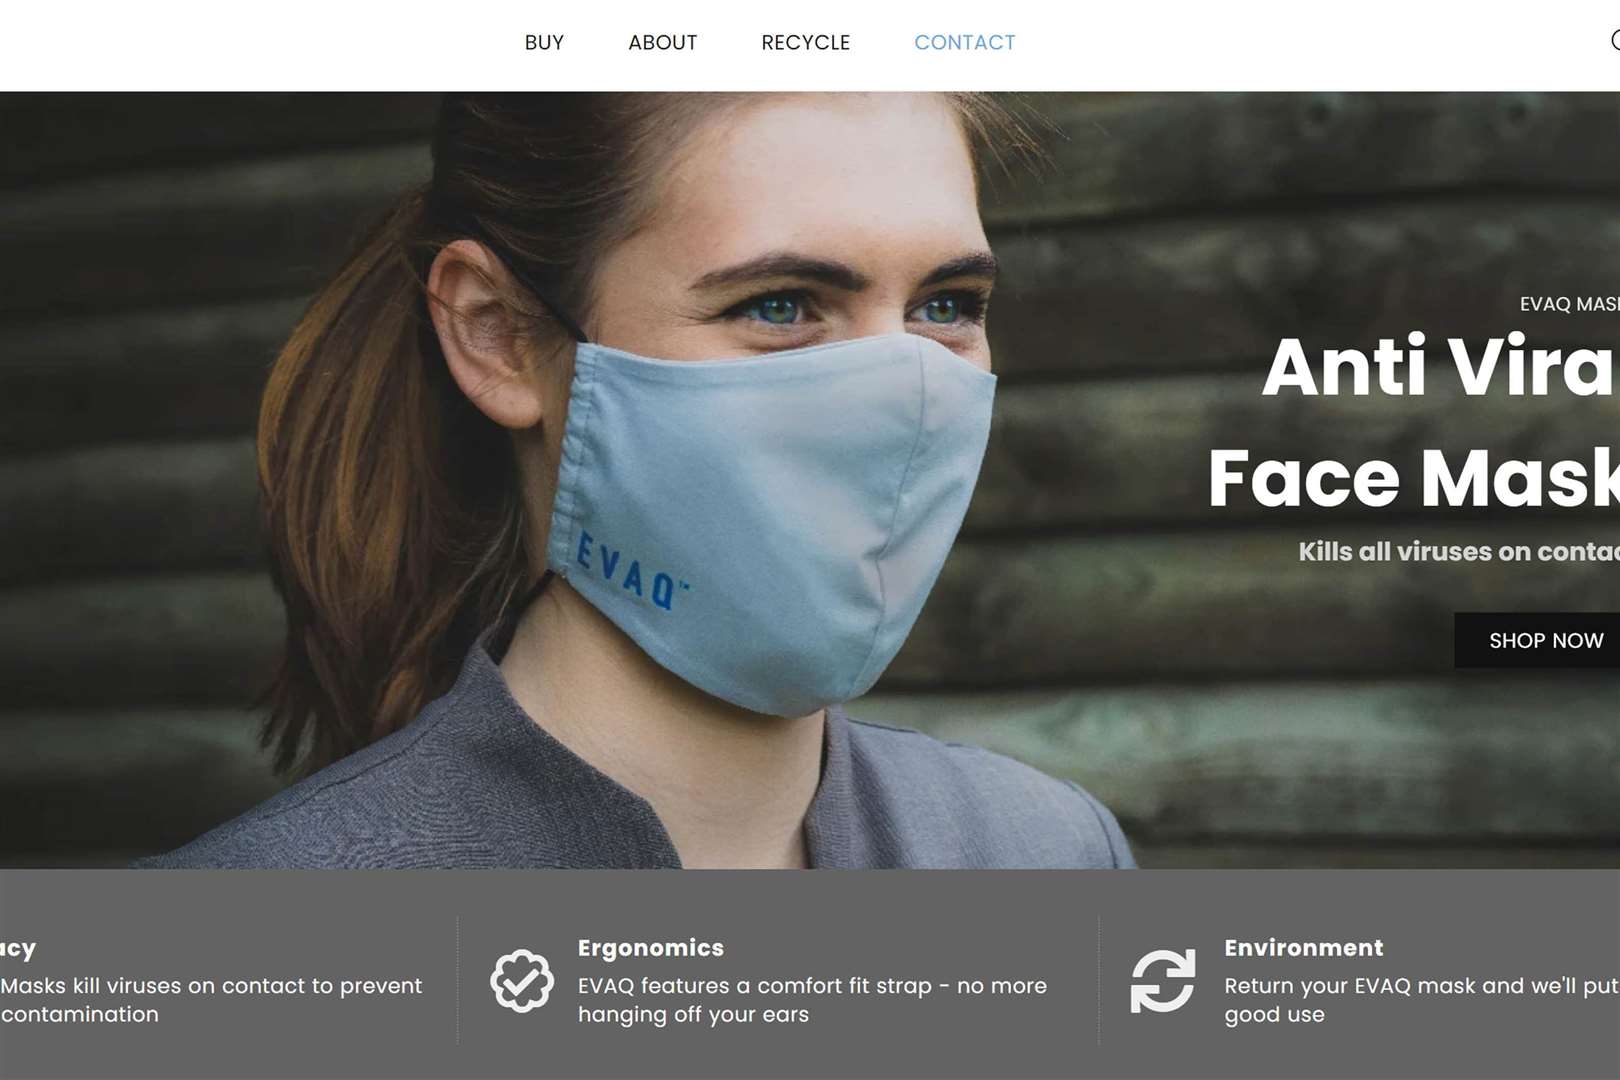 Facemask ad banned for claiming it could kill Covid-19 virus